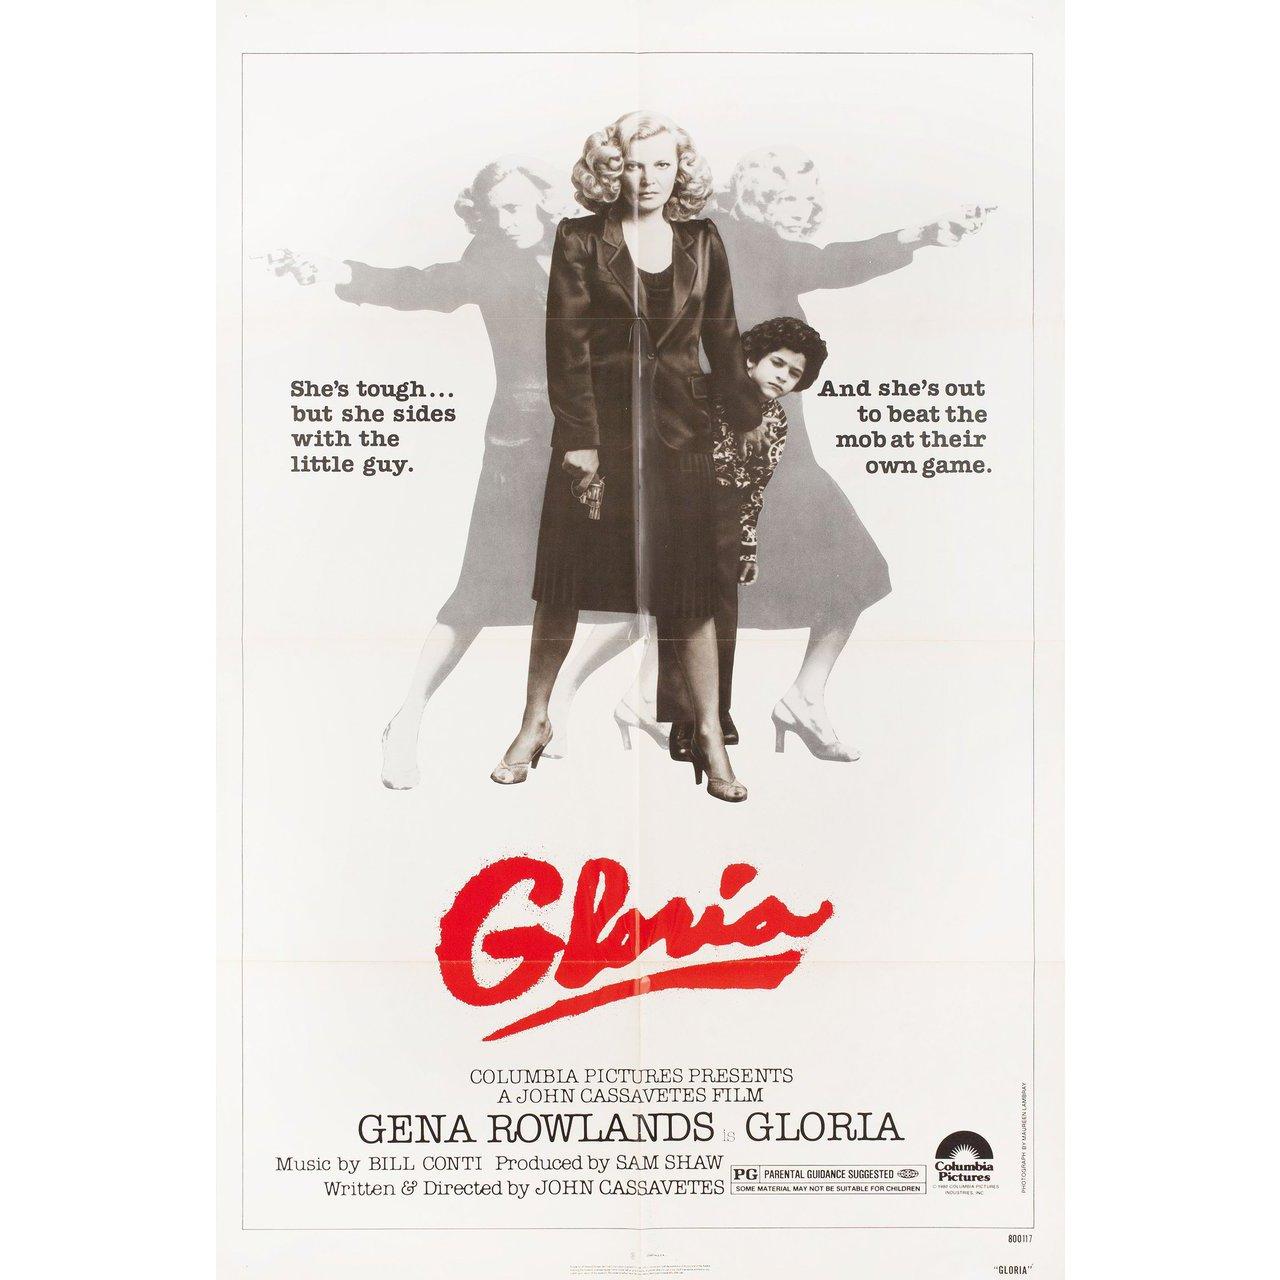 Original 1980 U.S. one sheet poster by Maureen Lambray for the film Gloria directed by John Cassavetes with Gena Rowlands / Julie Carmen / Tony Knesich / Gregory Cleghorne / Buck Henry. Very good-fine condition, folded. Many original posters were